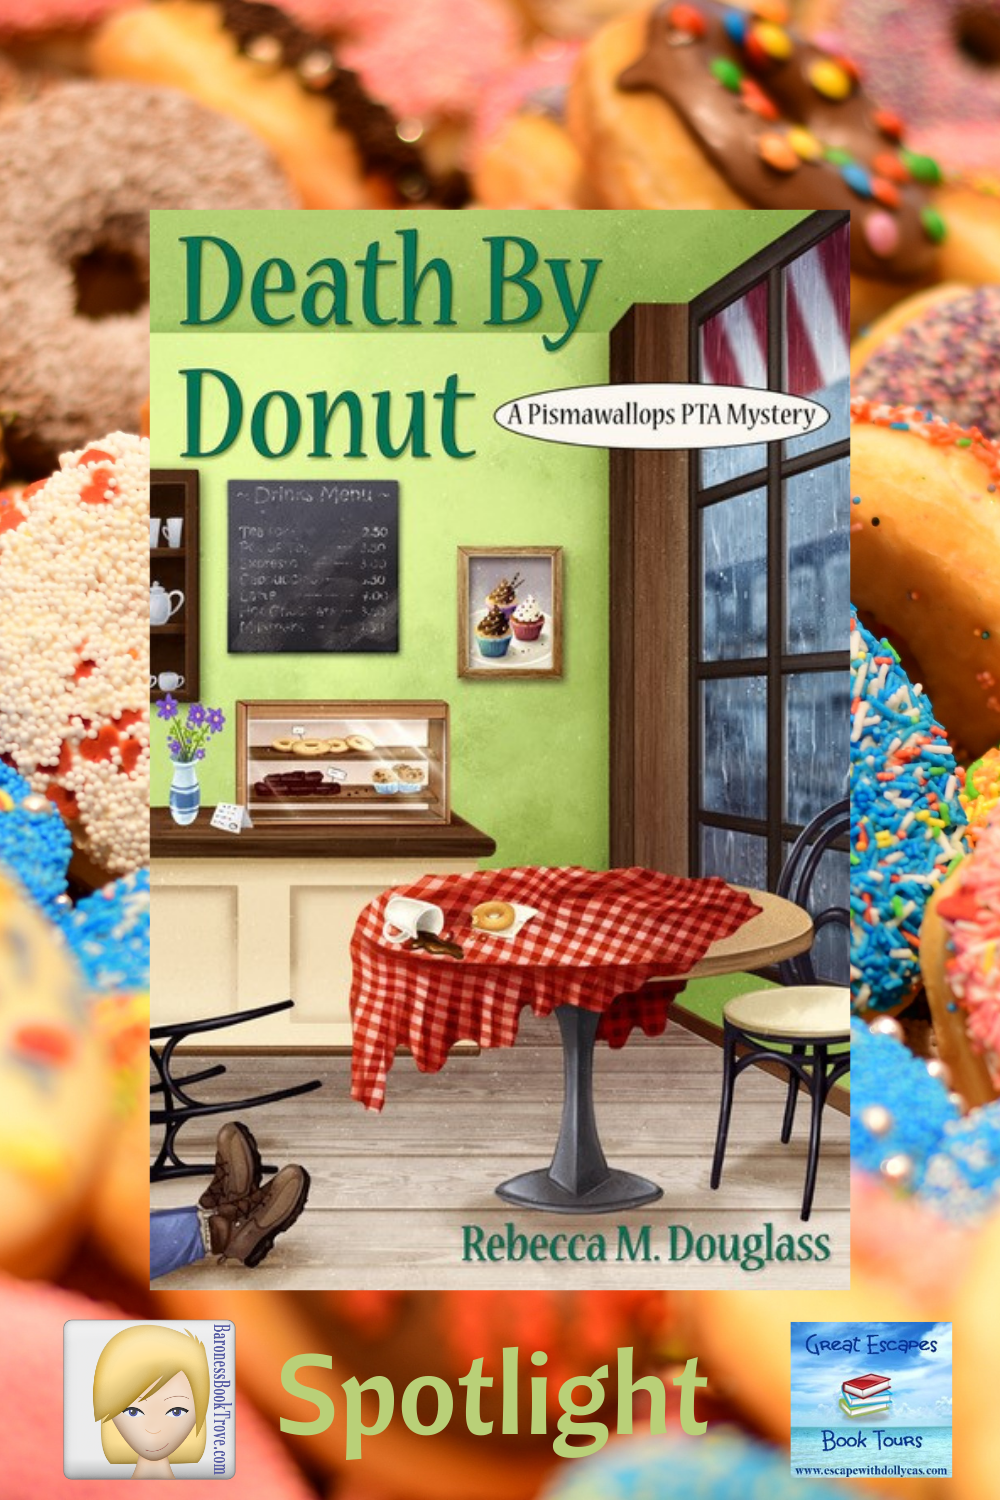 Death by Donut